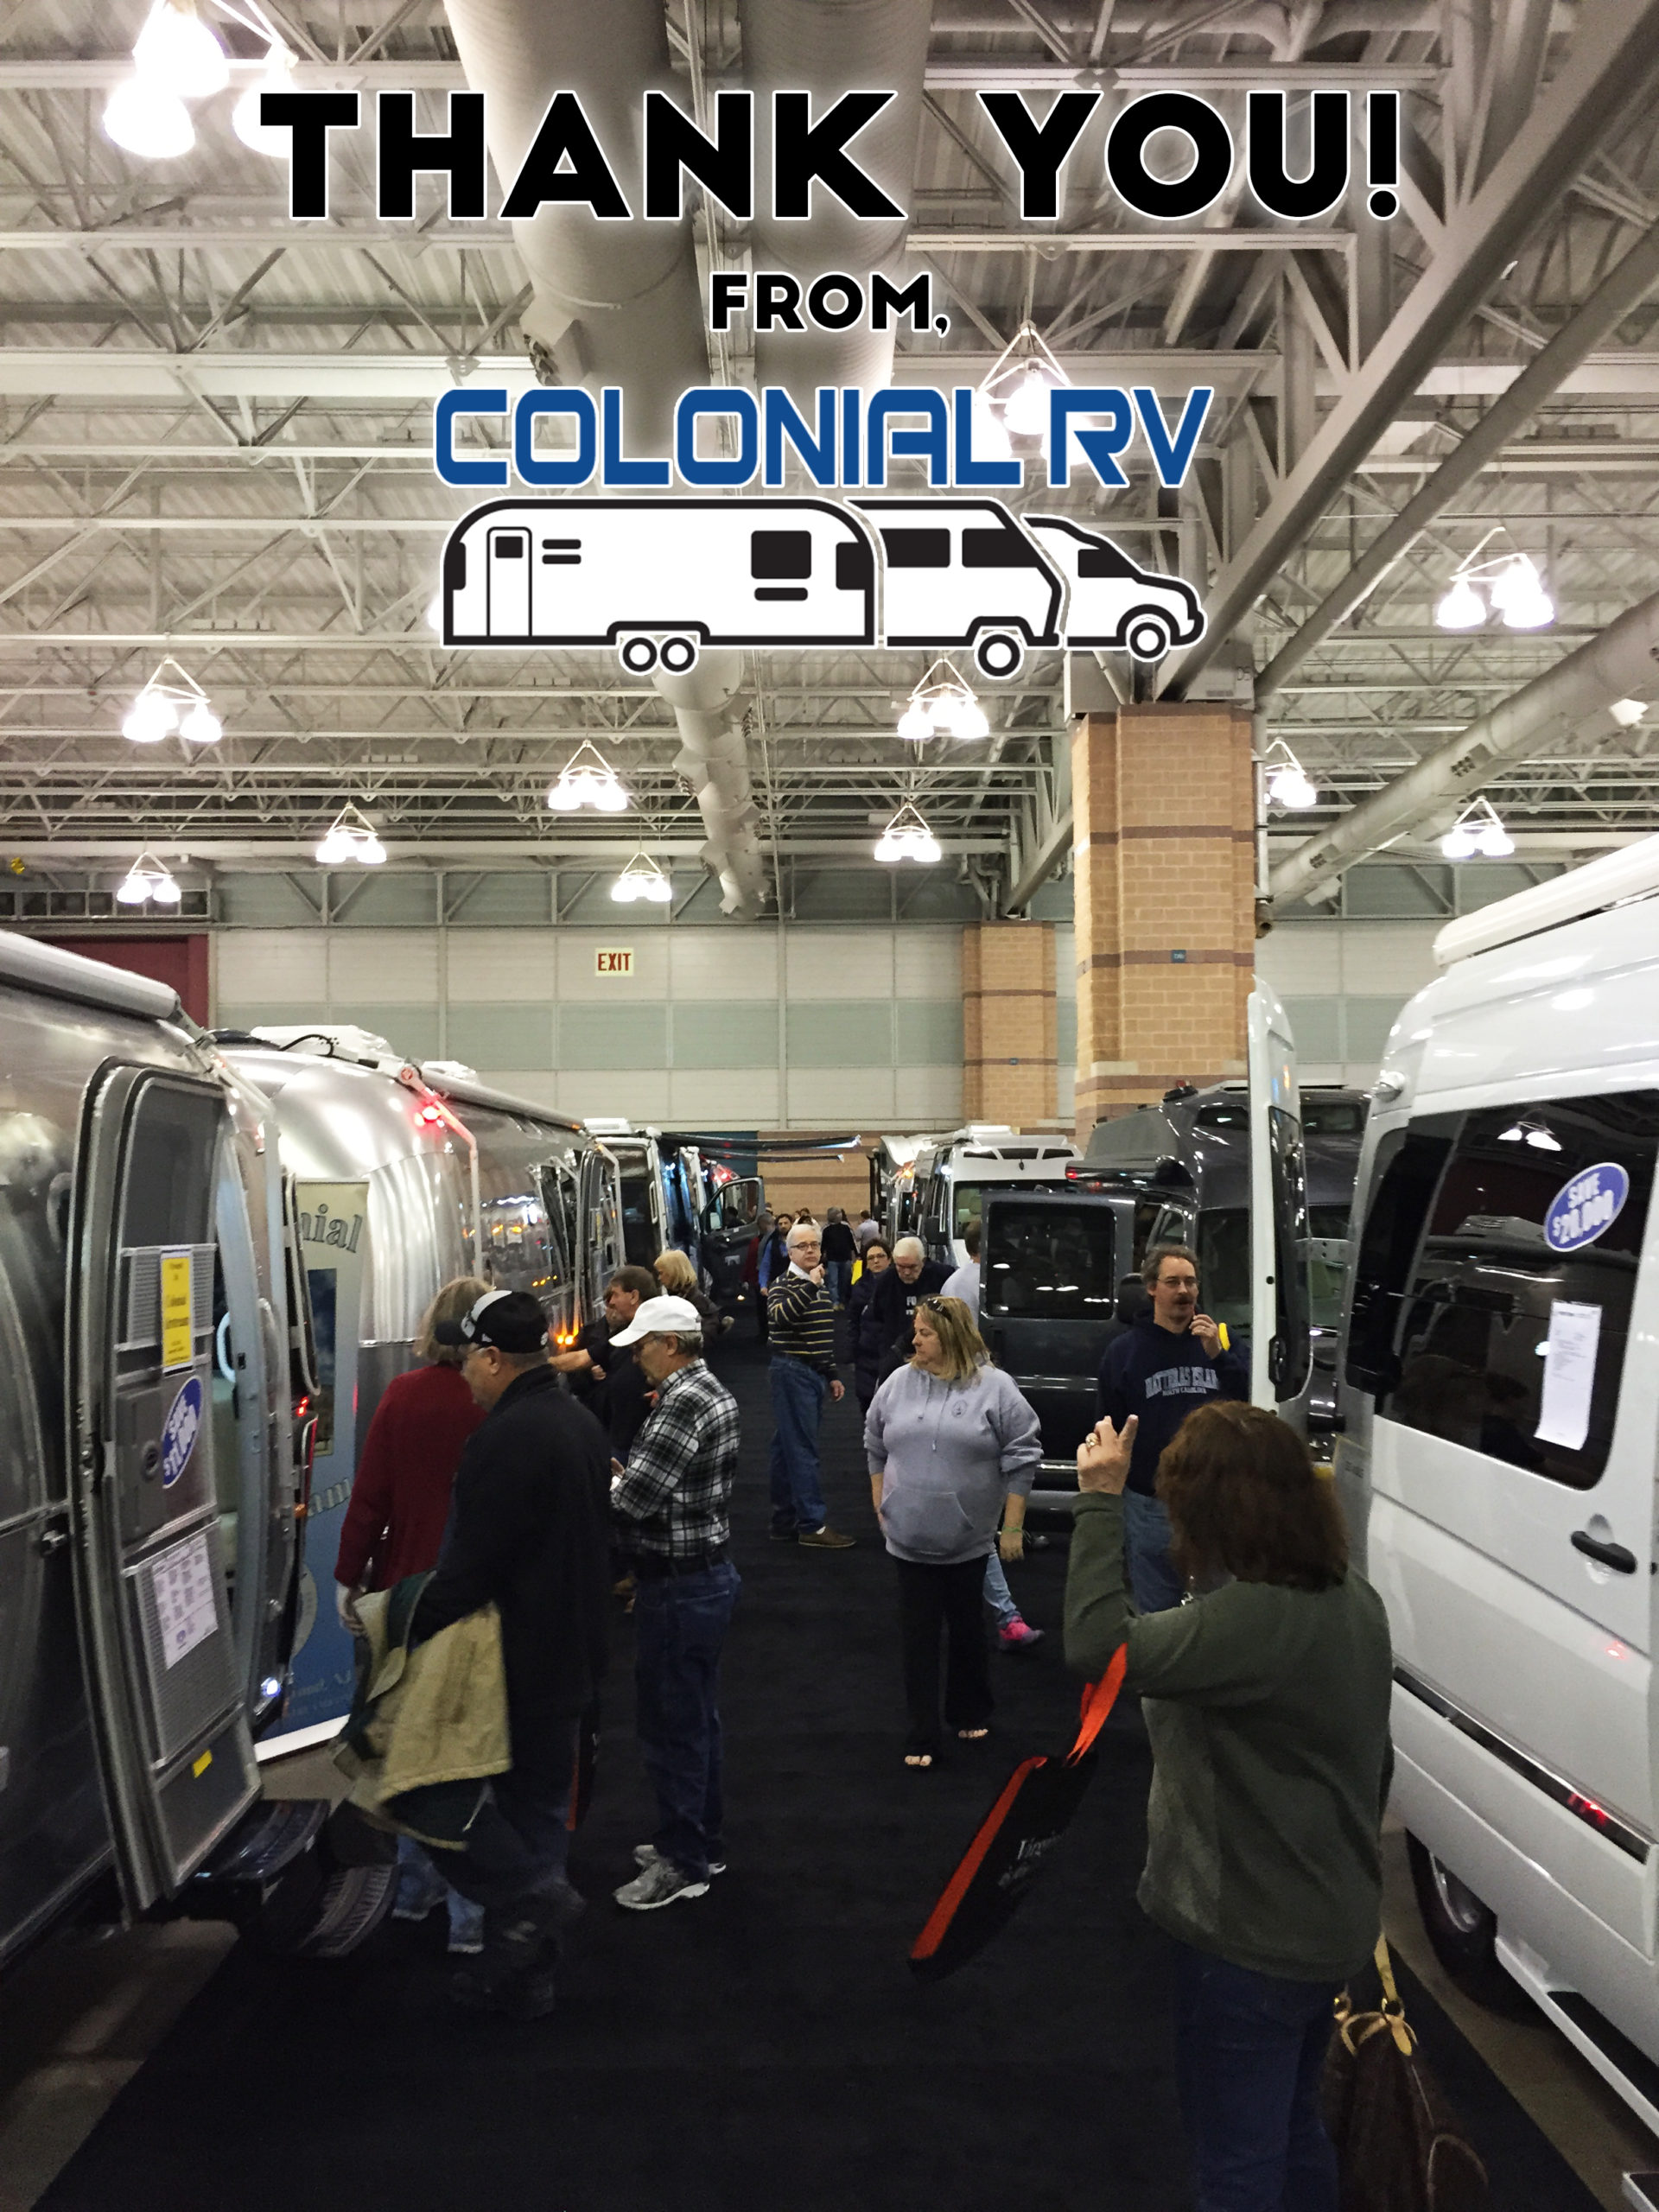 Thanks for Coming to The Atlantic City RV & Camping Show!